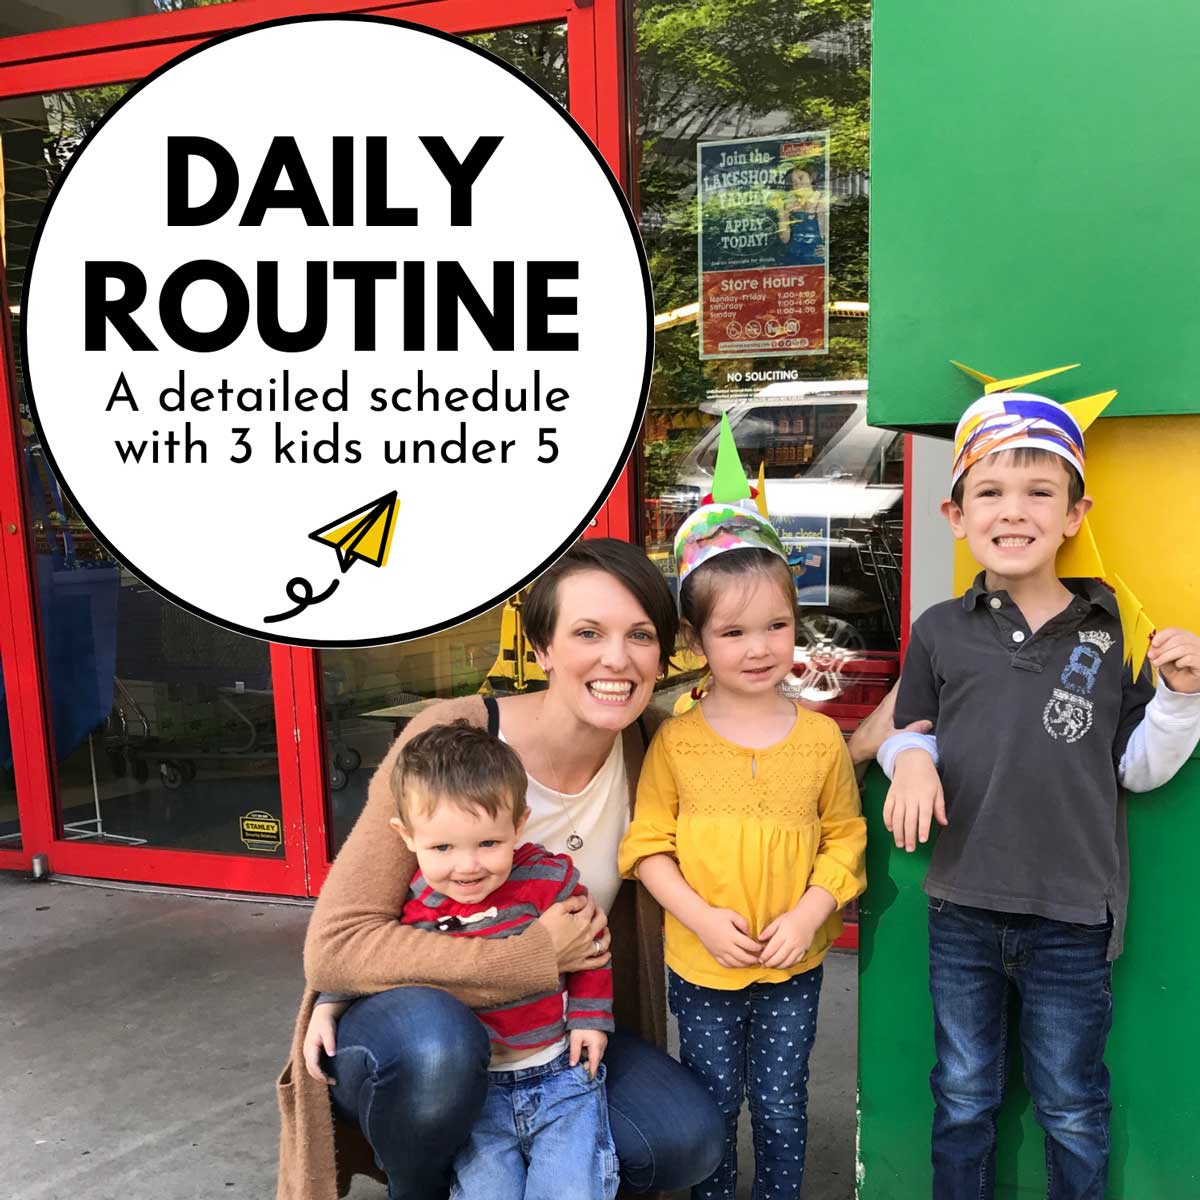 Daily Routine: A detailed schedule with 3 kids under 5. Image shows a parent with three kids in front of a store.